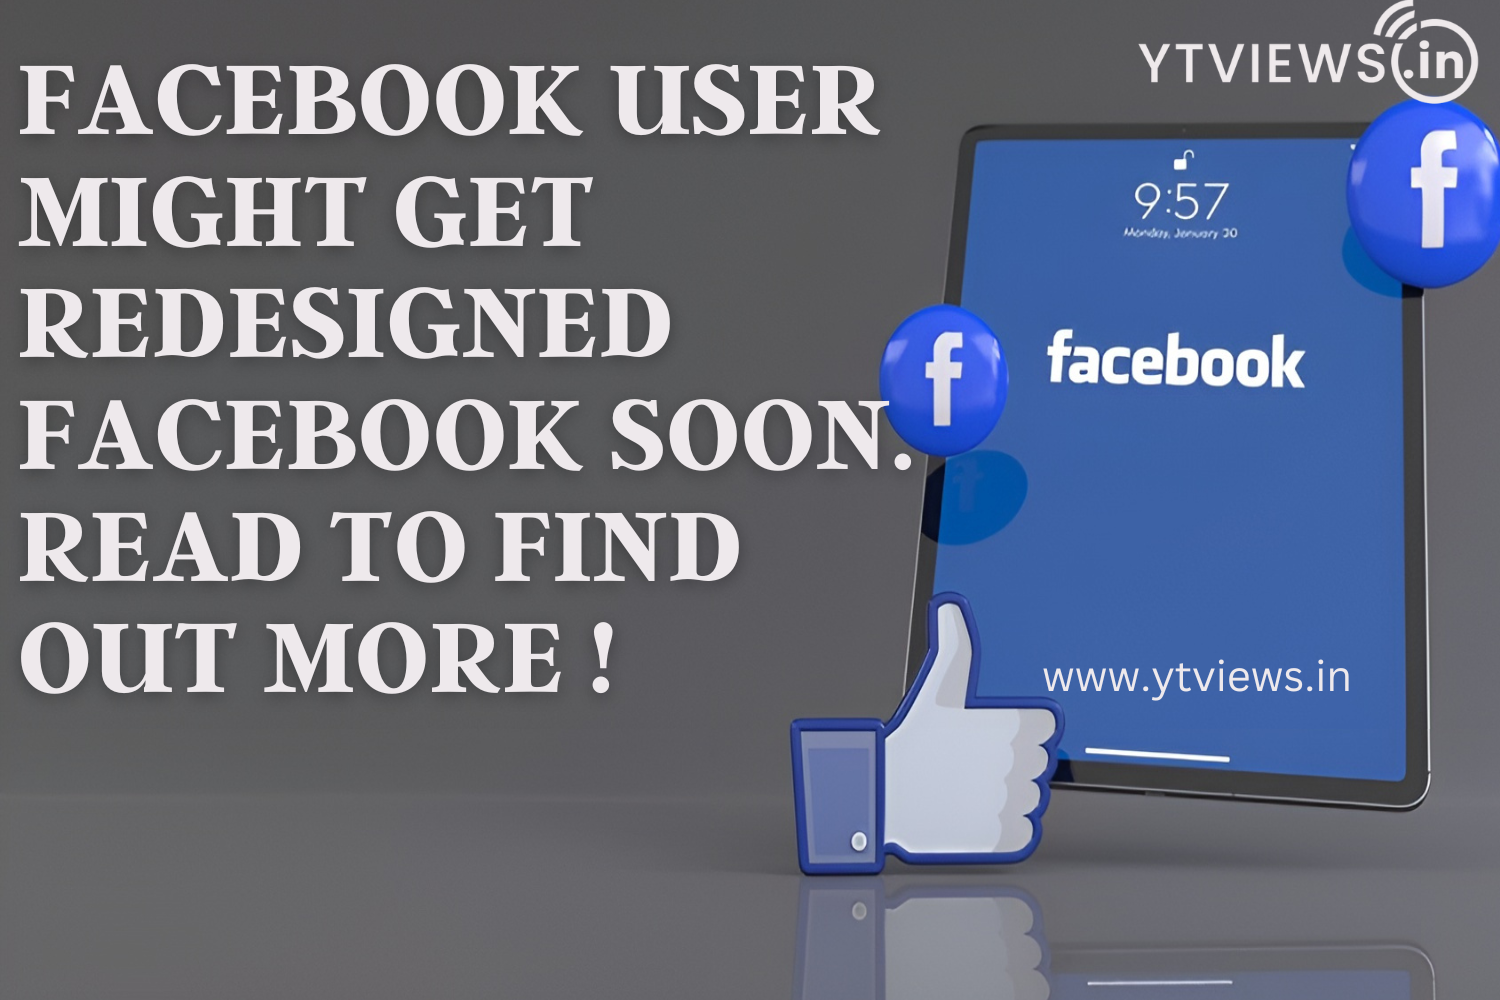 Facebook Users Might Get Redesigned Facebook Soon. Read To Find Out More